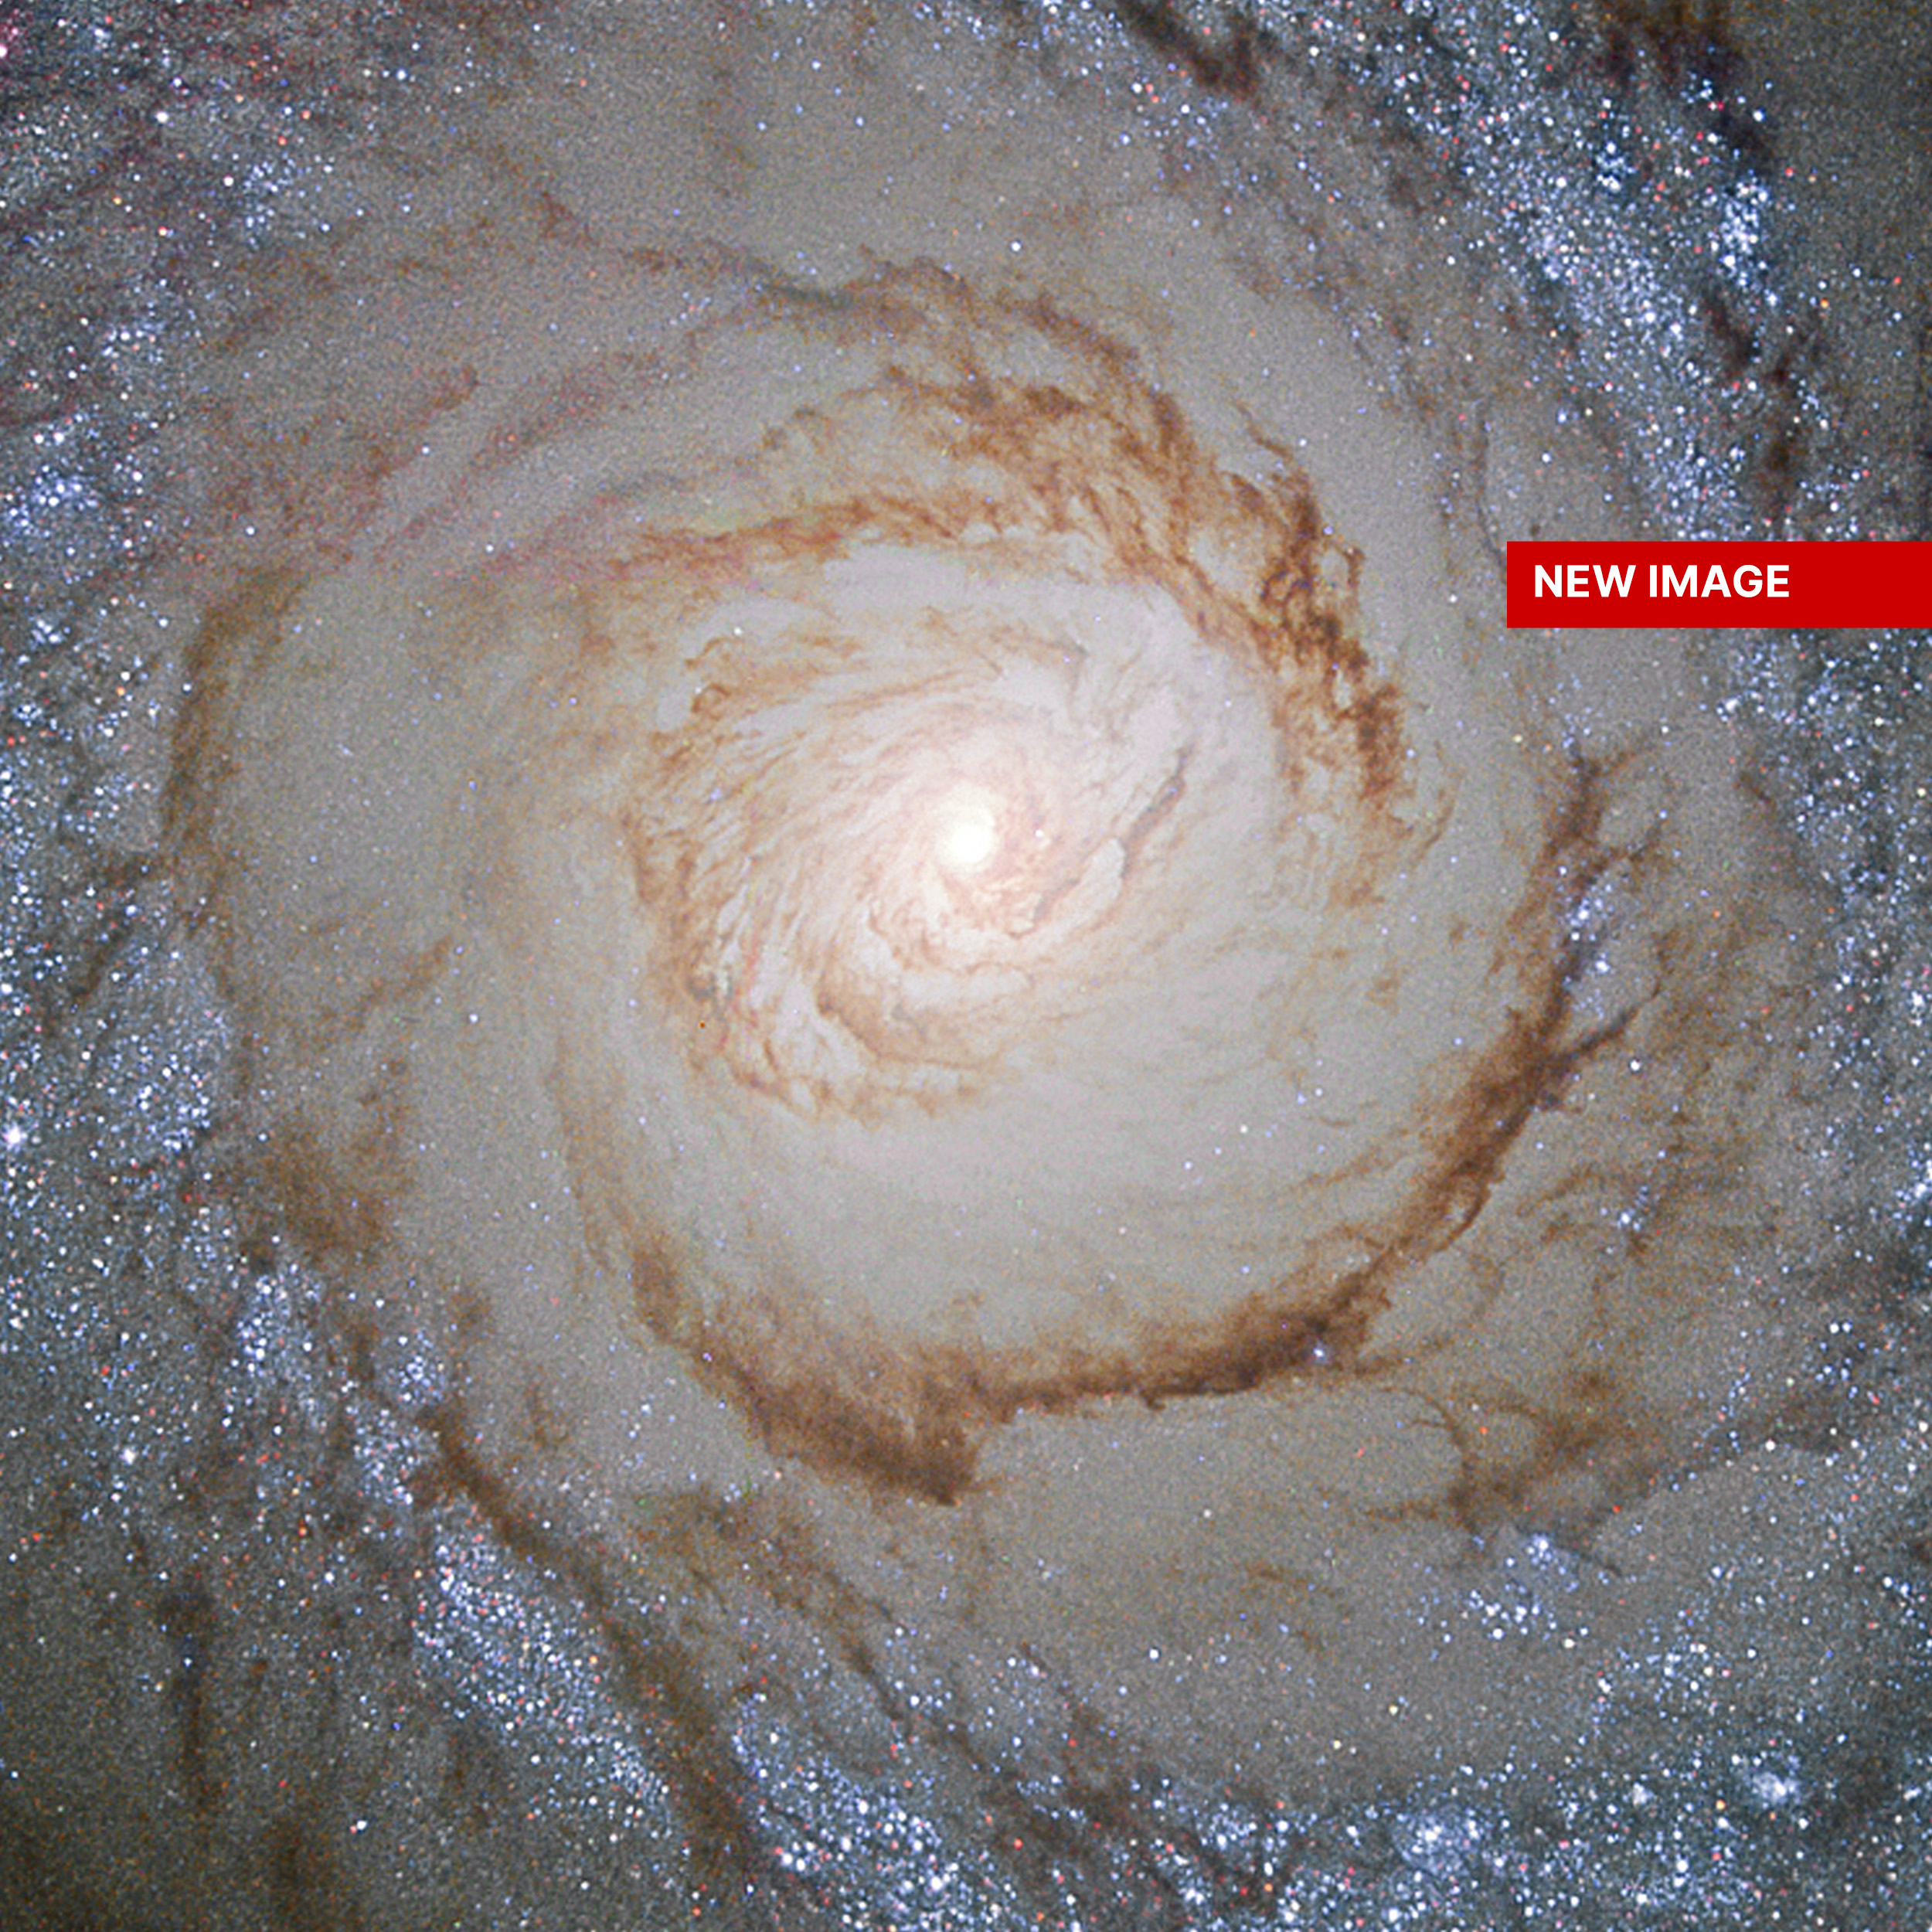 A bright yellow galaxy core shines, surrounded by spiraling arms laced through with dark dust and blue-white regions of new stars. A red box near the upper-right corner holds the phrase "New Image" in white letters.